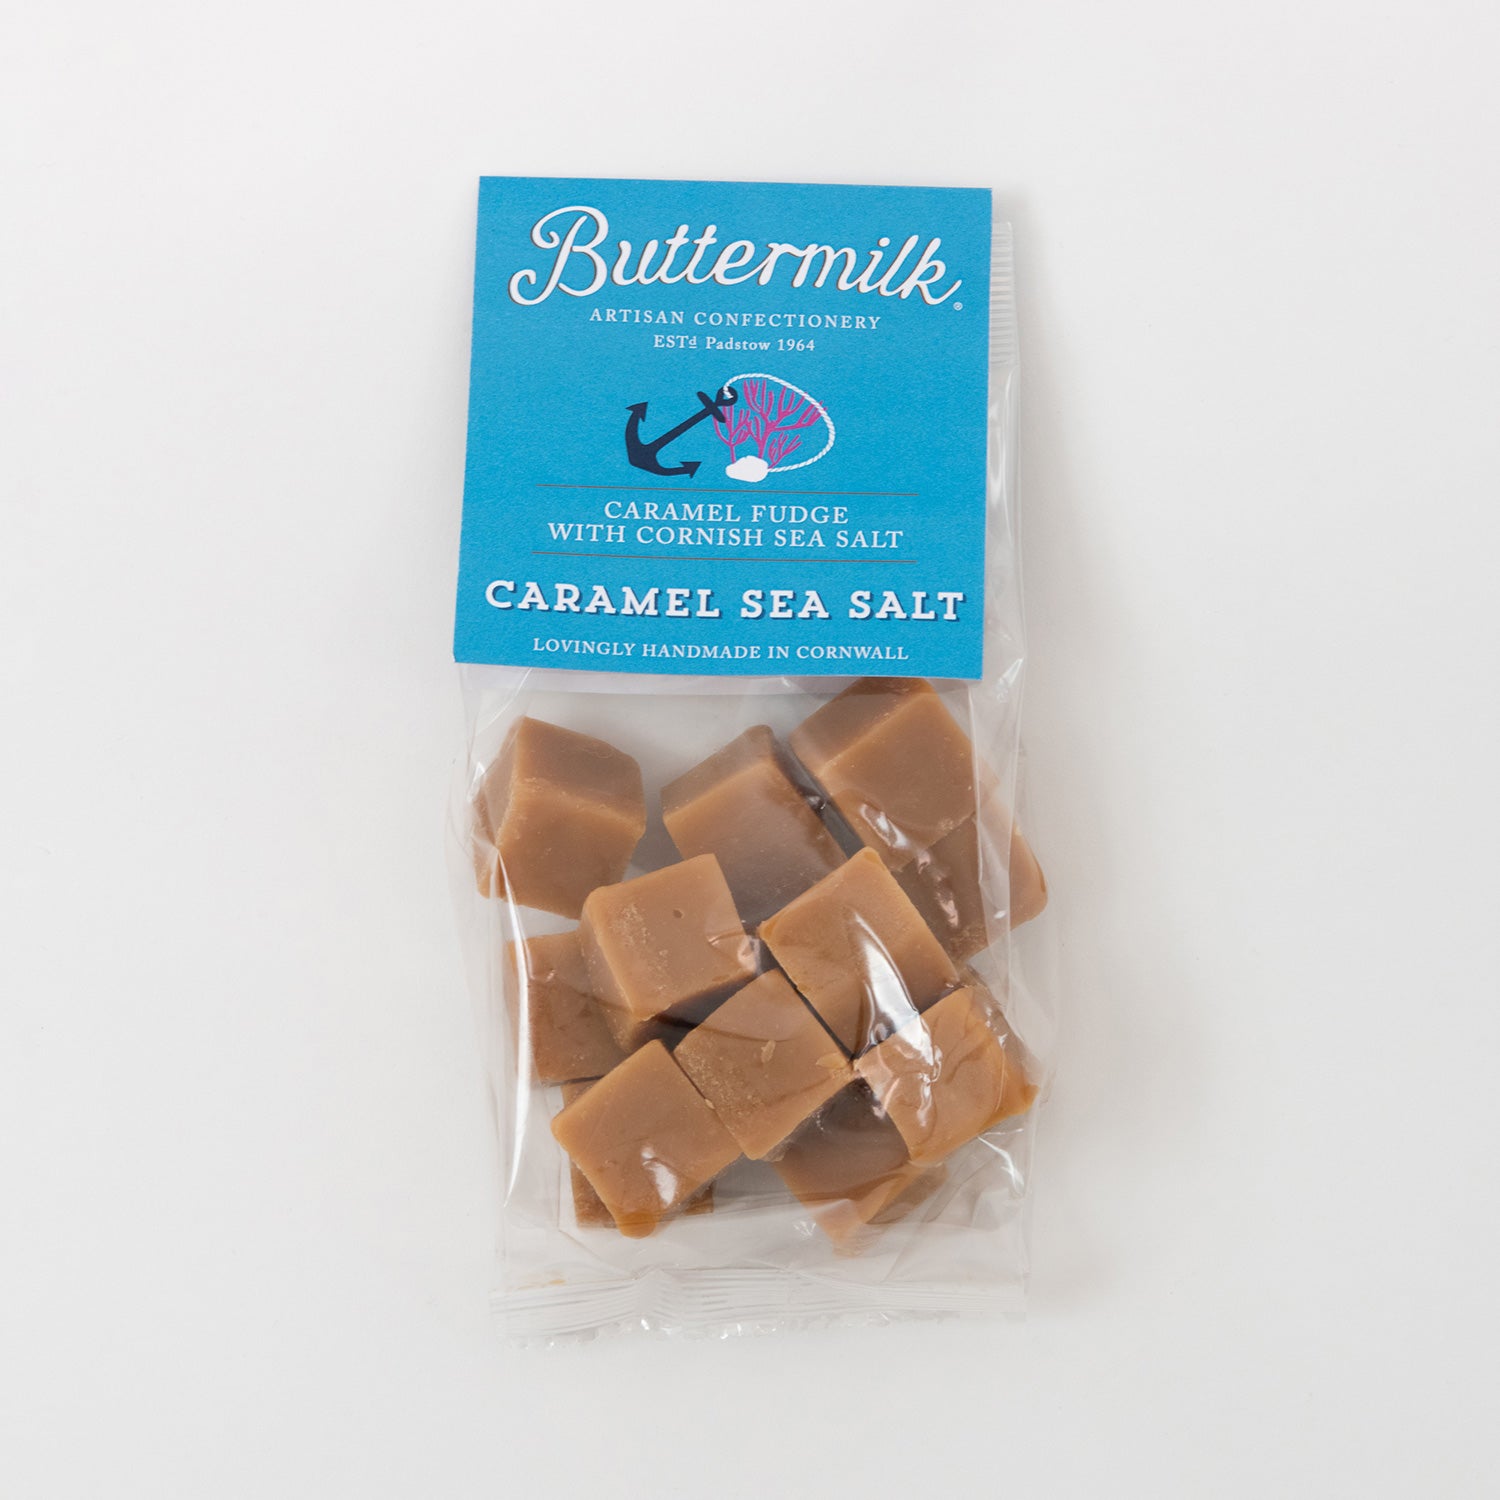 Buttermilk Salted Caramel Fudge in clear bag with Blue card label with Buttermilk Logo and anchor & shell design.